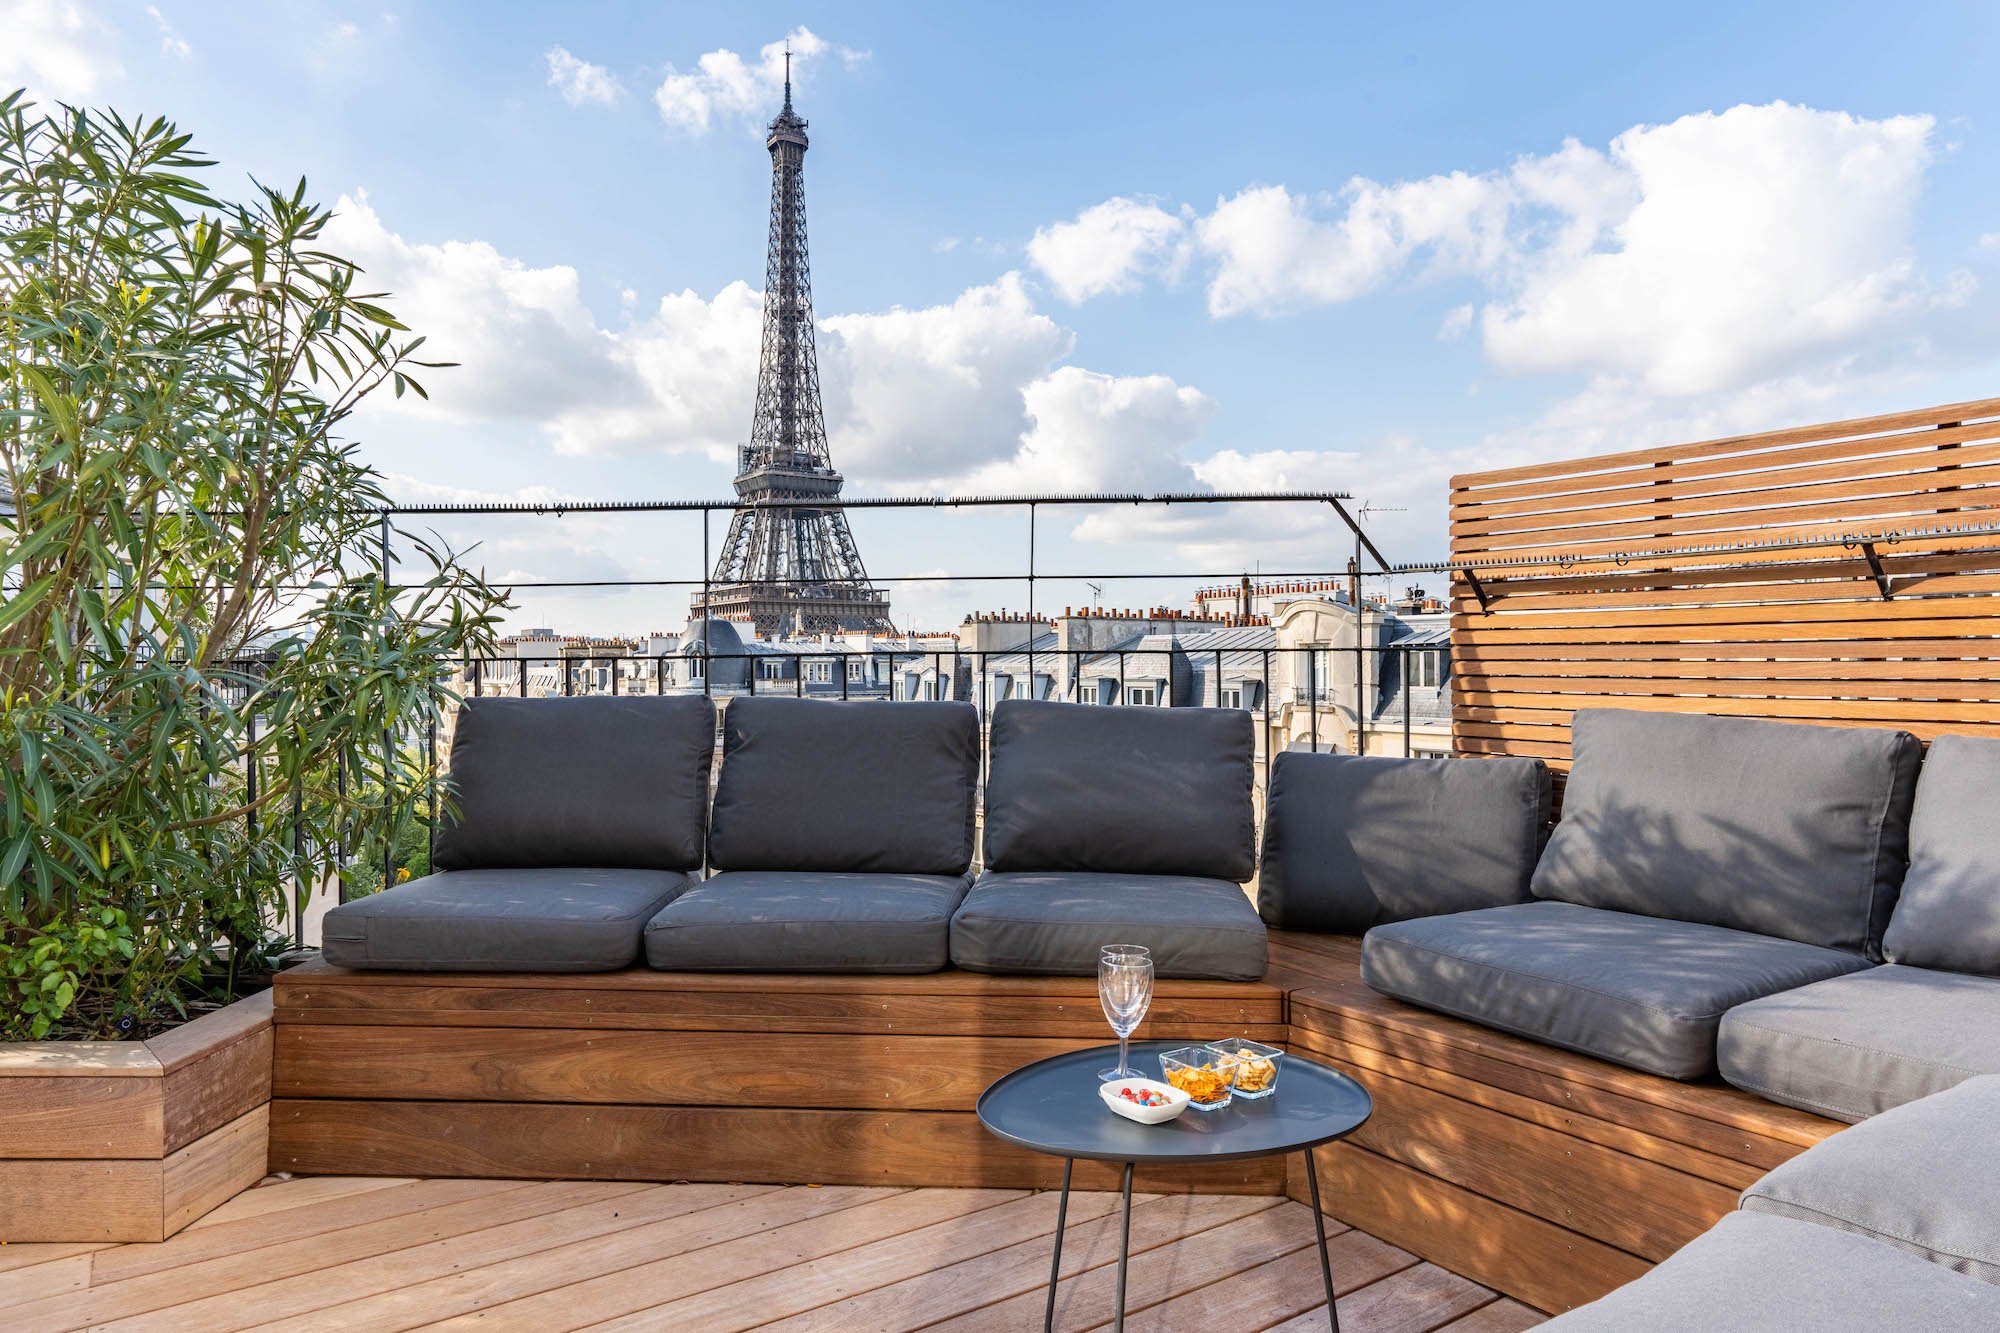 Apartment with view of the Eiffel Tower